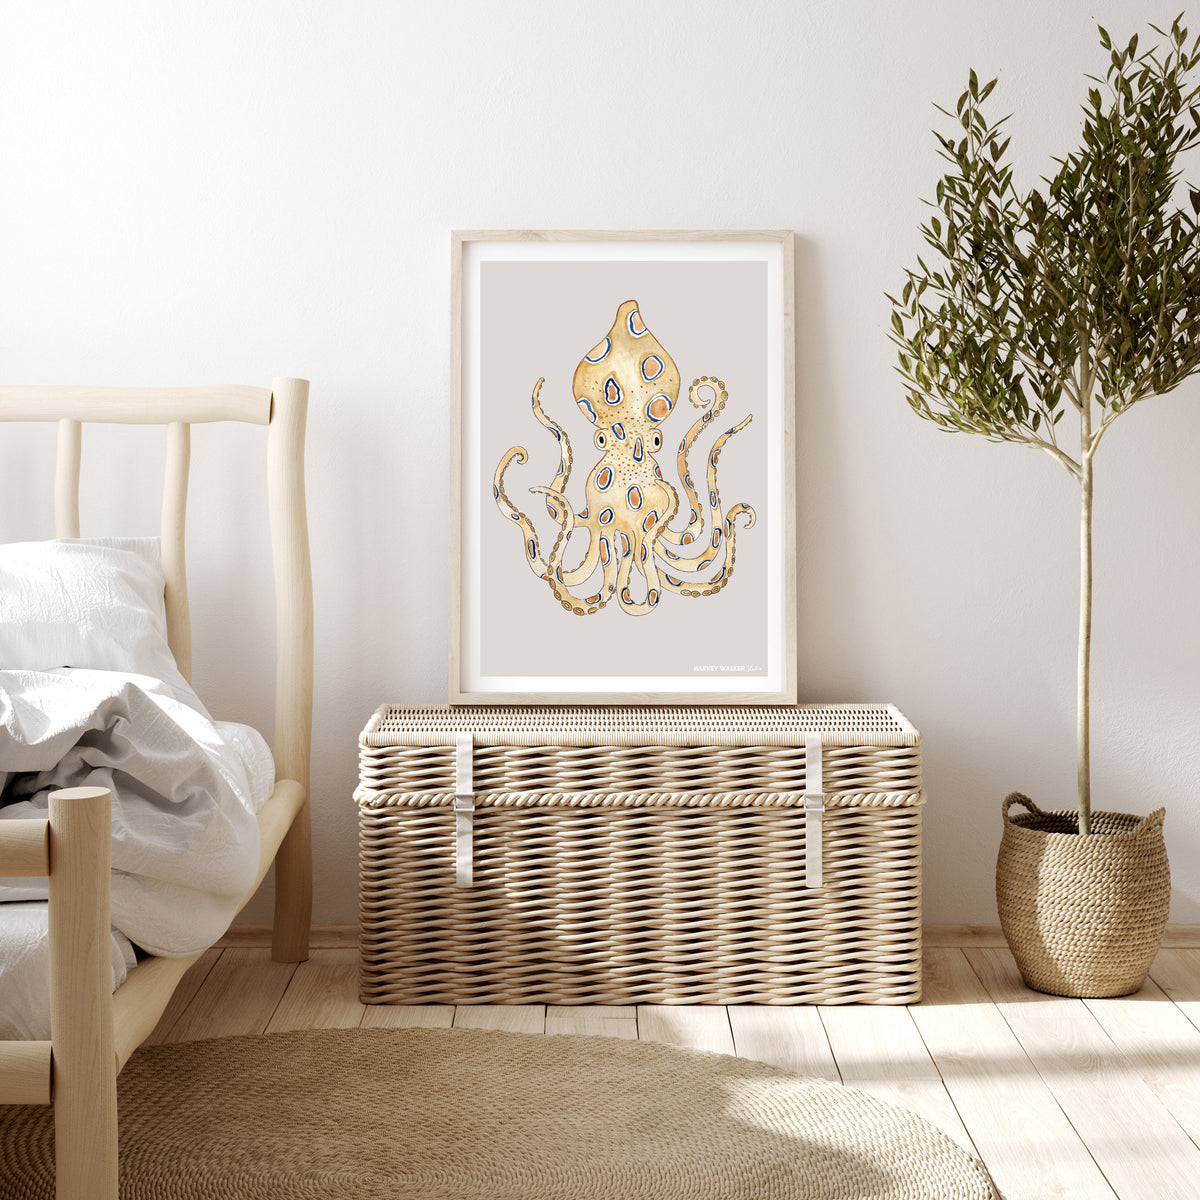 Positioned in a holiday like relaxed kids bedroom, this beautiful print is great for a shared kids bedroom . With its neutral tones, the octopus images brings out the natural wood colours in the frame and furniture.